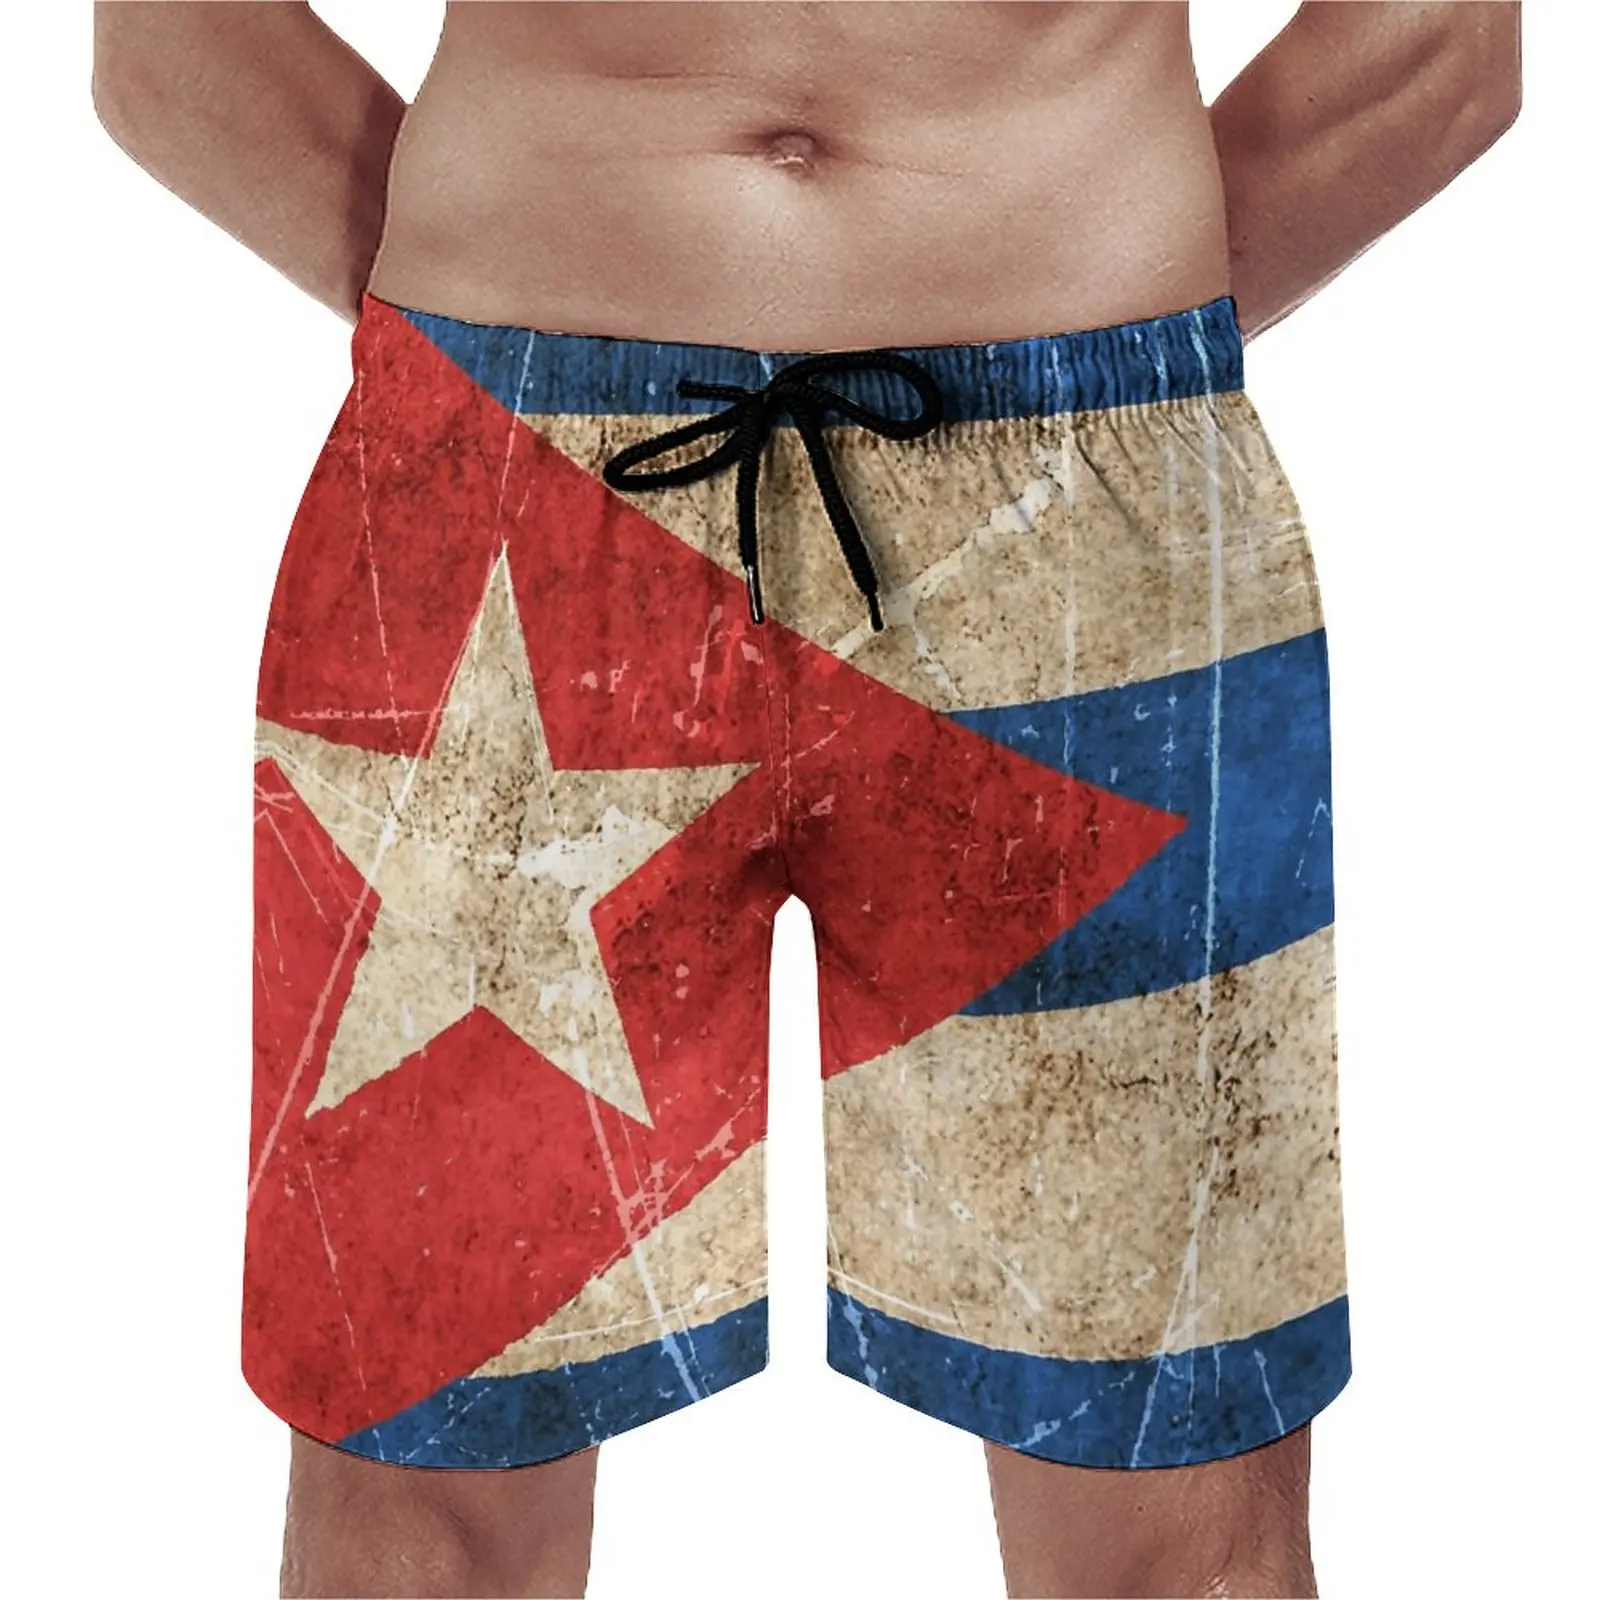 

Vintage Aged And Scratched Cuban Flag Beach Shorts Causal Breathable Quick Dry Graphic Summer Weather Random Adjustable Drawcord